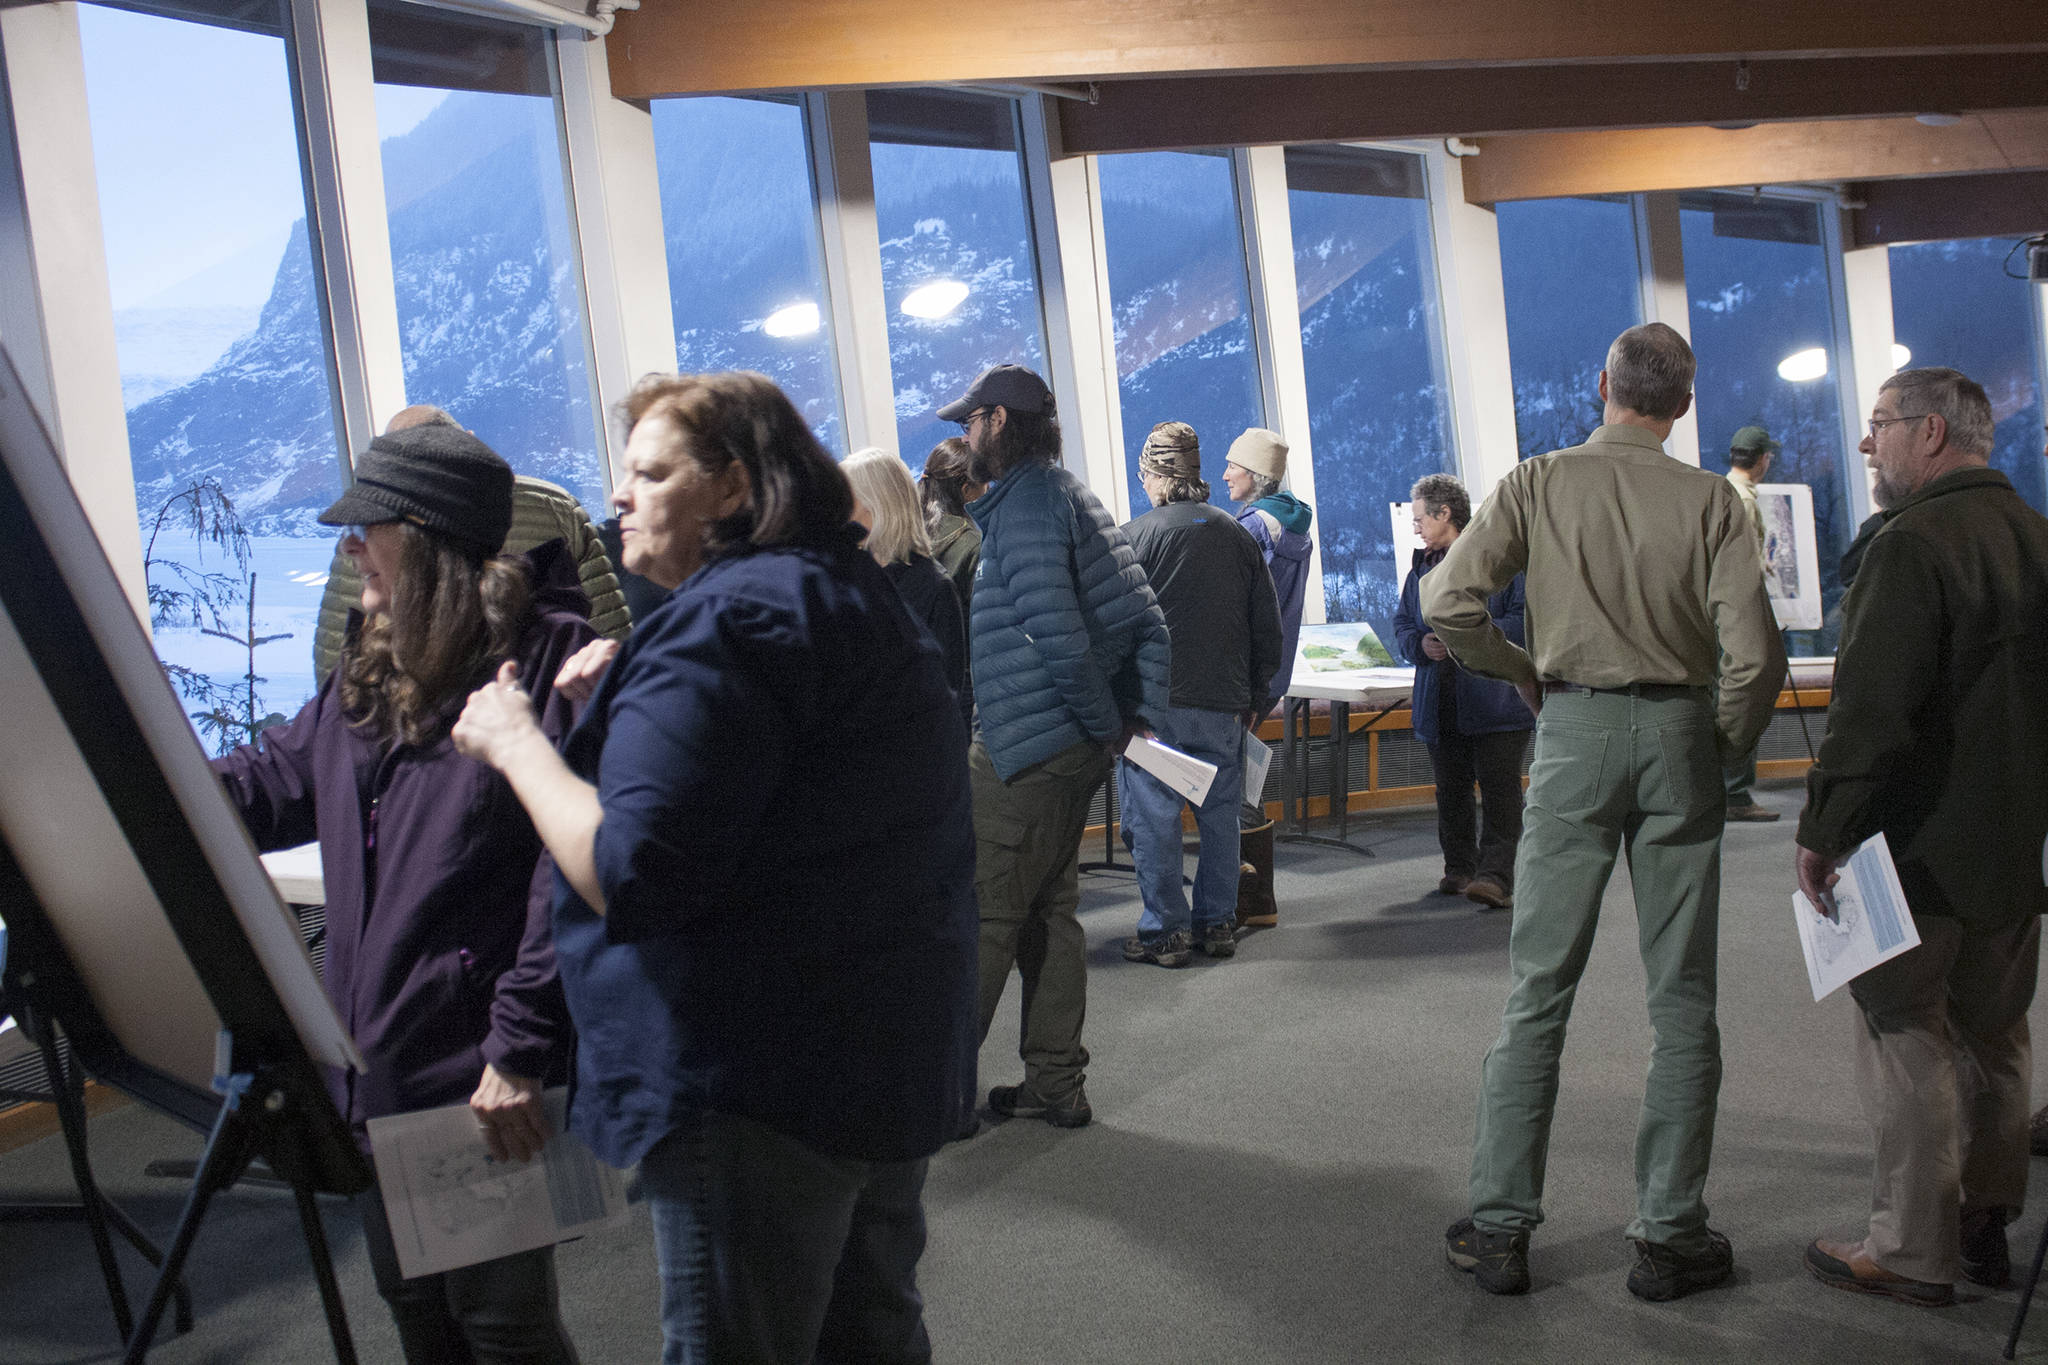 Despite howling winds and plenty of slush, dozens of people attended a scoping open house Thursday at the Mendenhall Glacier Visitor Center. (Ben Hohenstatt | Juneau Empire)